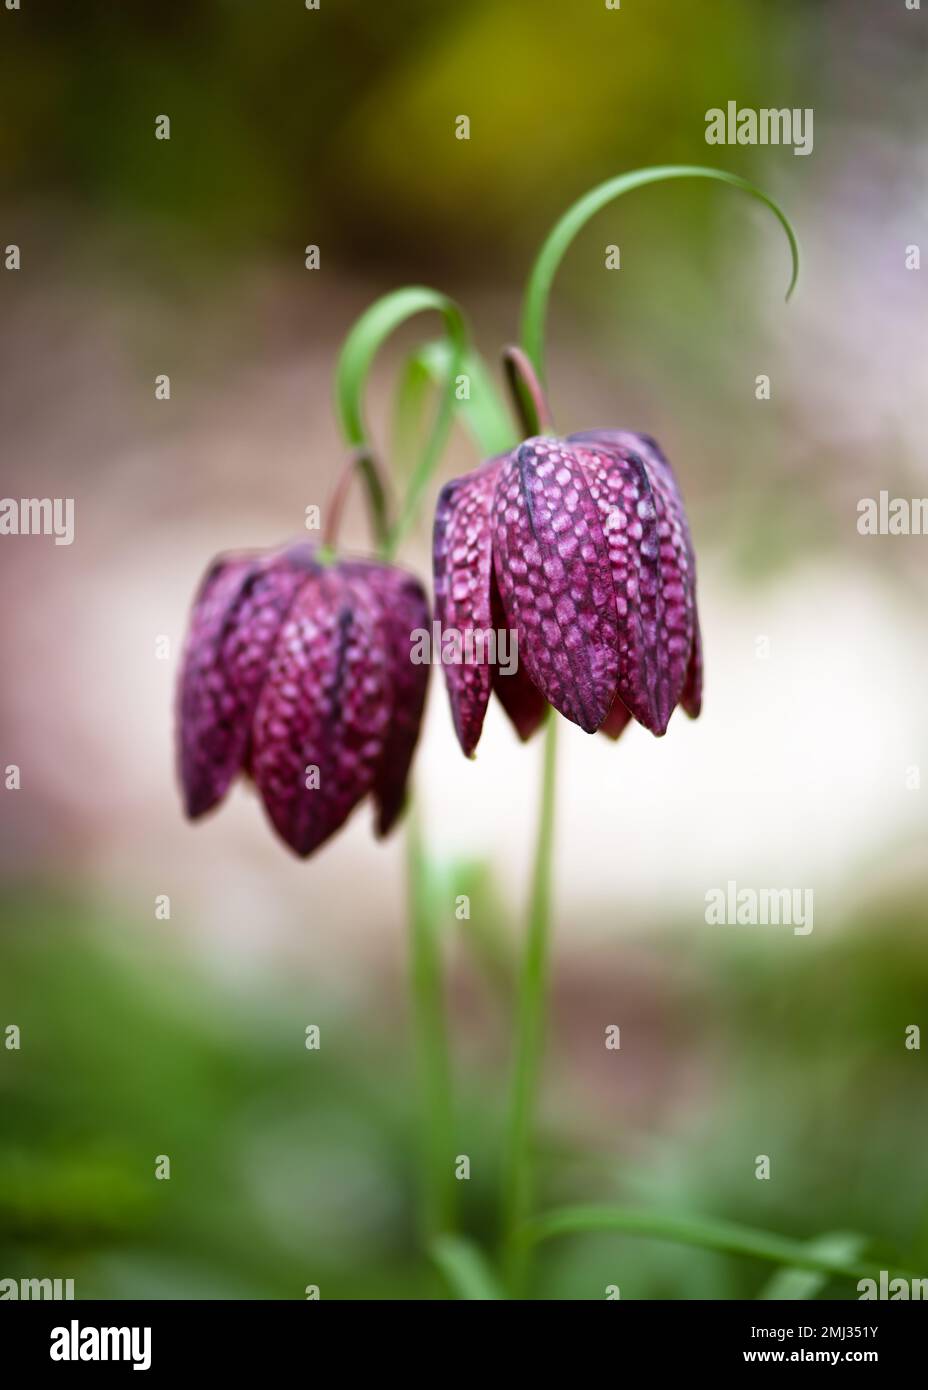 Beautiful purple snake's head fritillary wildflowers in an early spring garden with blurred background. (Fritillaria meleagris) Stock Photo